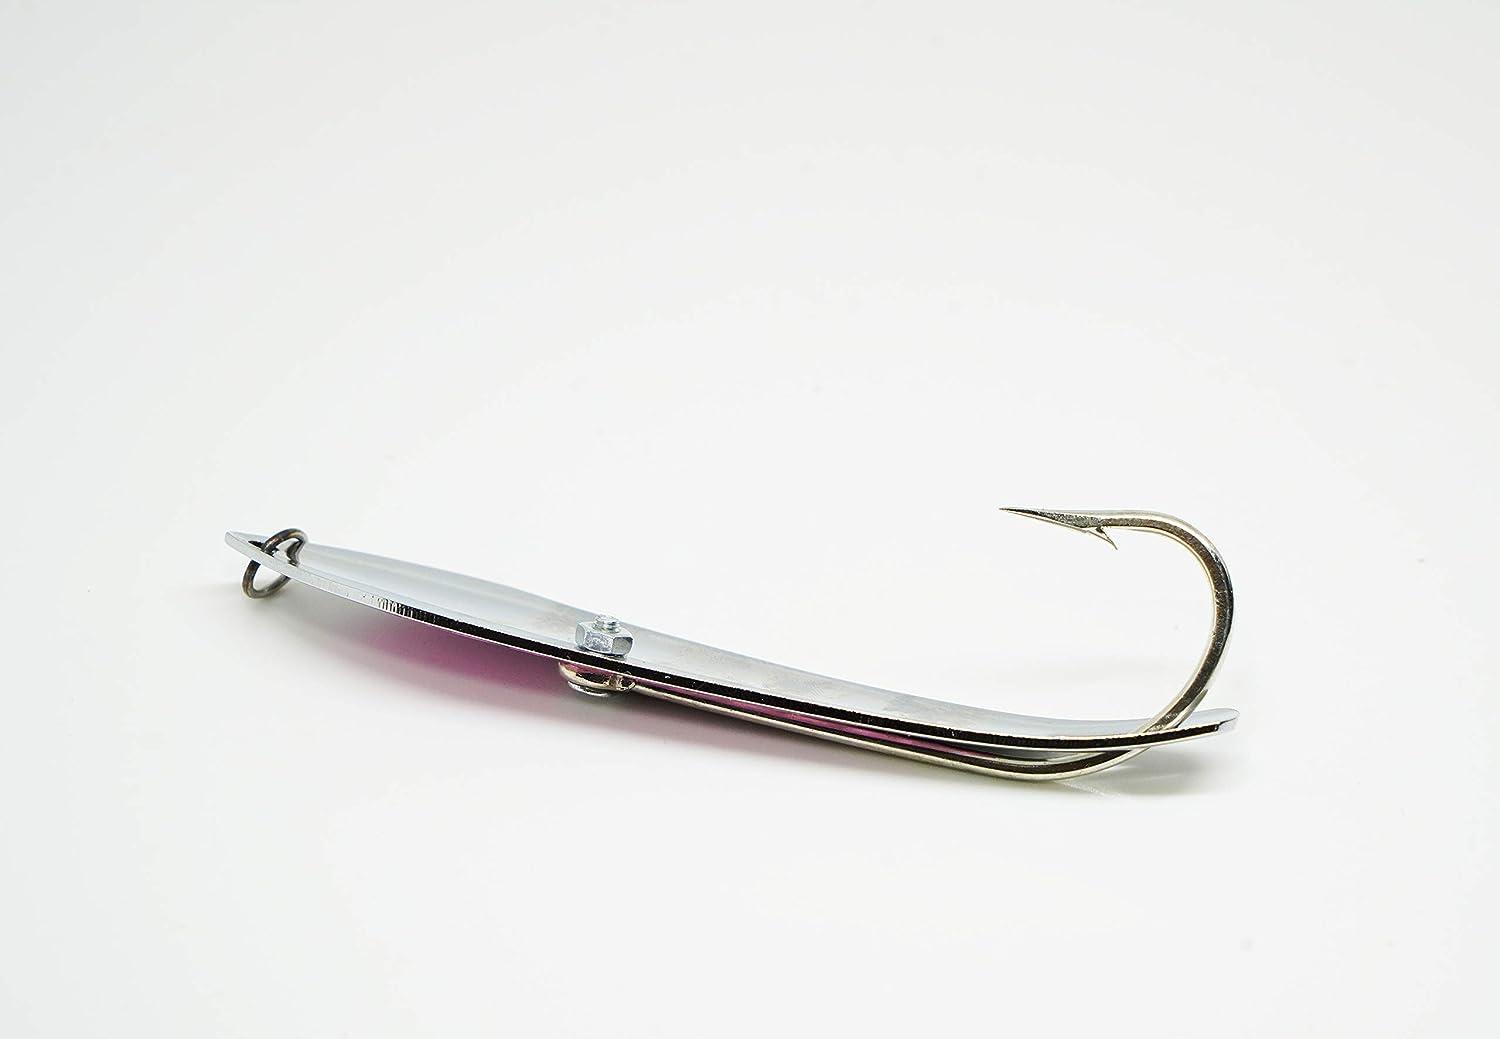 Spoon Fishing Lure Offshore Trolling, 4 1/2-Inch Blade, Size 7/0 New and  Improved Design! Pink